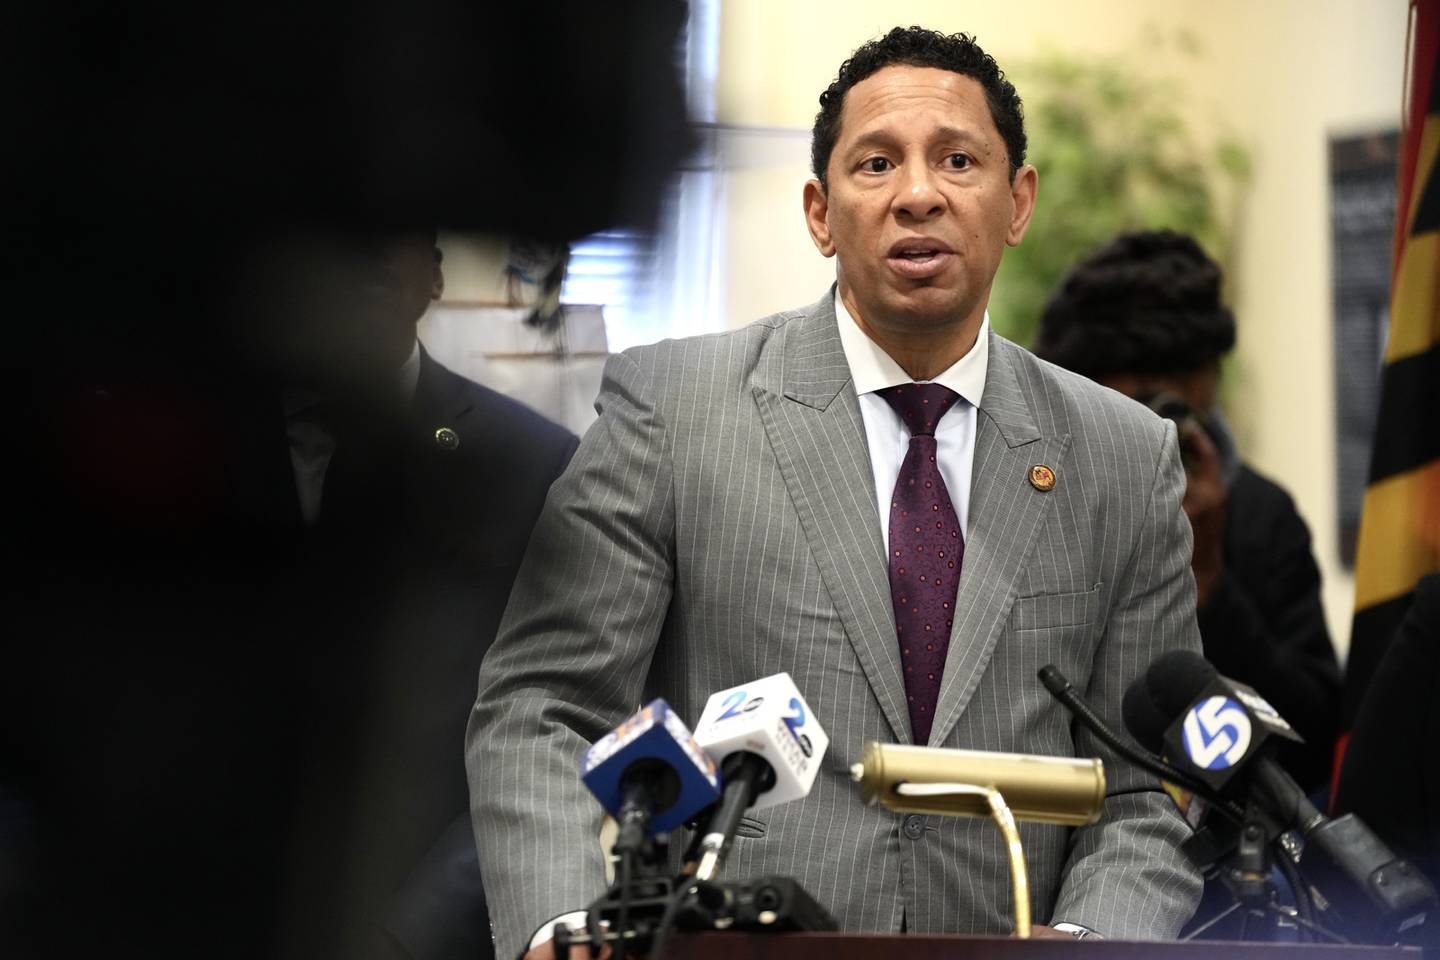 Baltimore City State’s Attorney Ivan Bates and state lawmakers promote public safety bills in the general assembly in Annapolis on February 15, 2023.